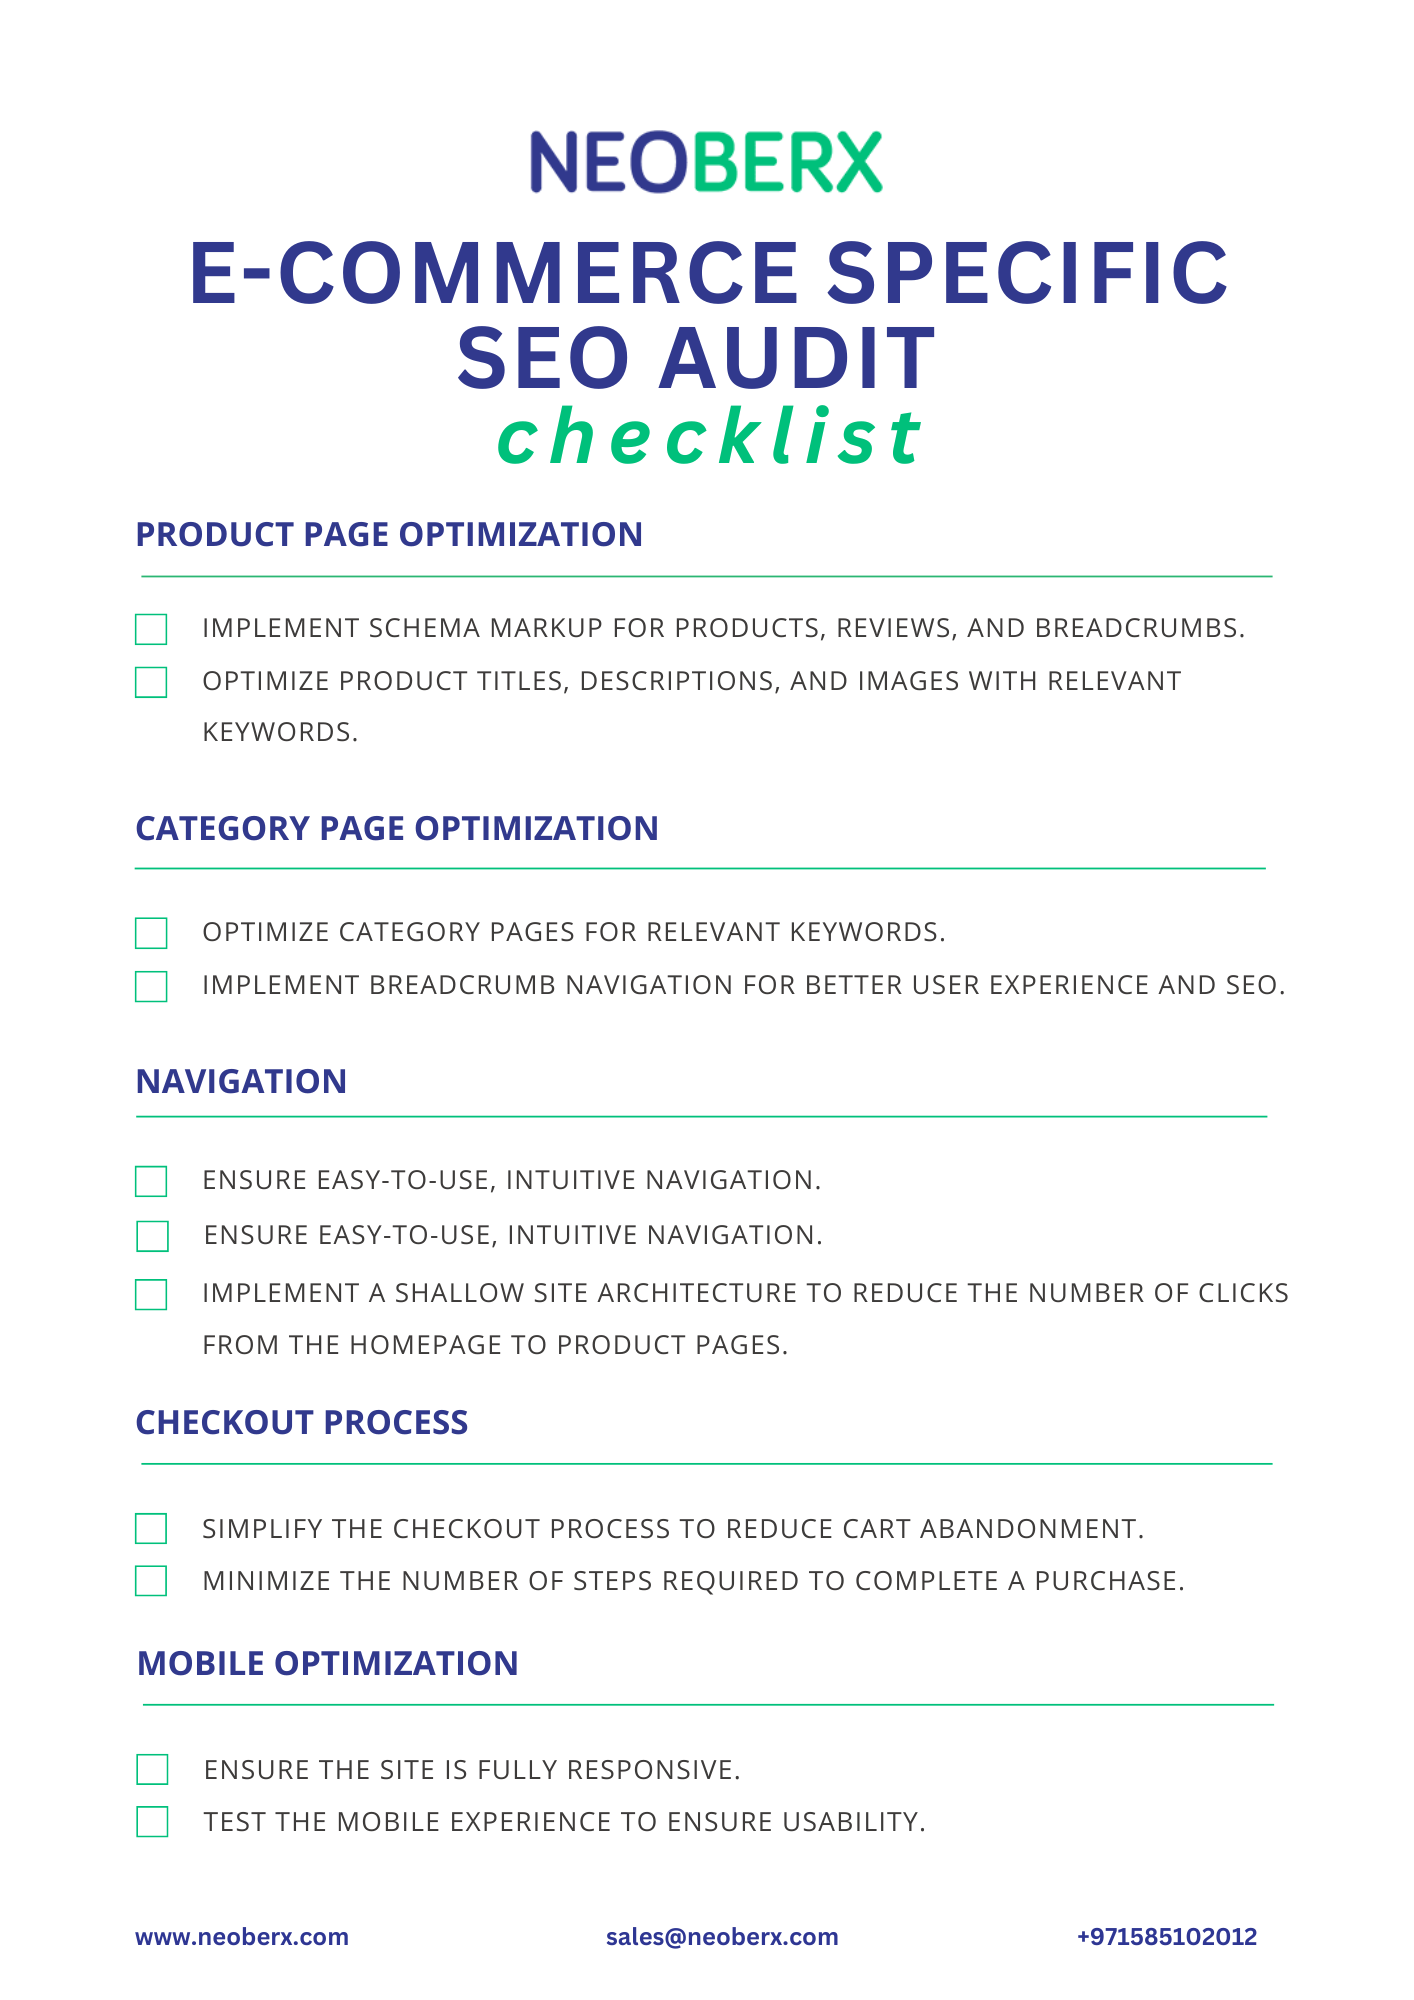 eCommerce Specification SEO Audit for Improve Conversion Rate